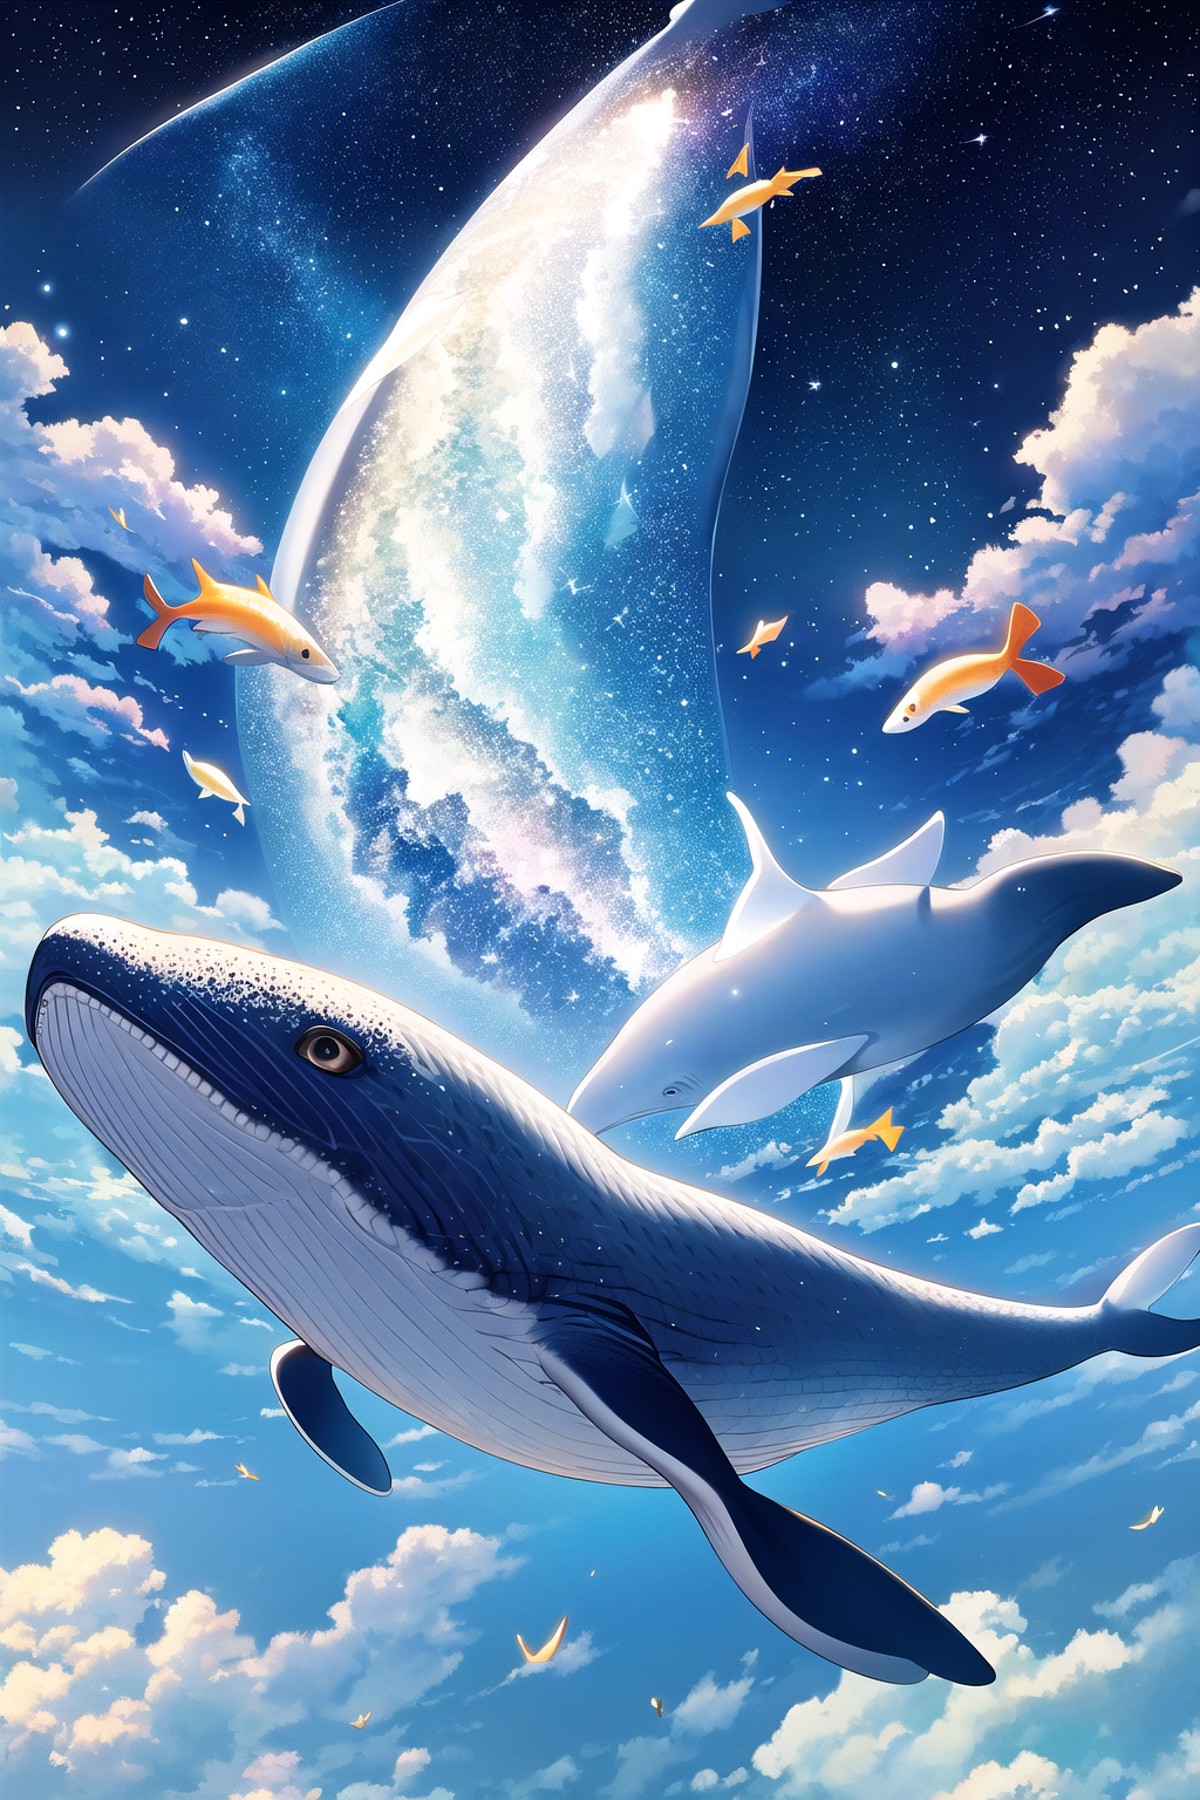 masterpiece, best quality, scenery, whale, fish, starry sky, galaxy, cosmos, fantasy, floating object|fish, backlight, shadow